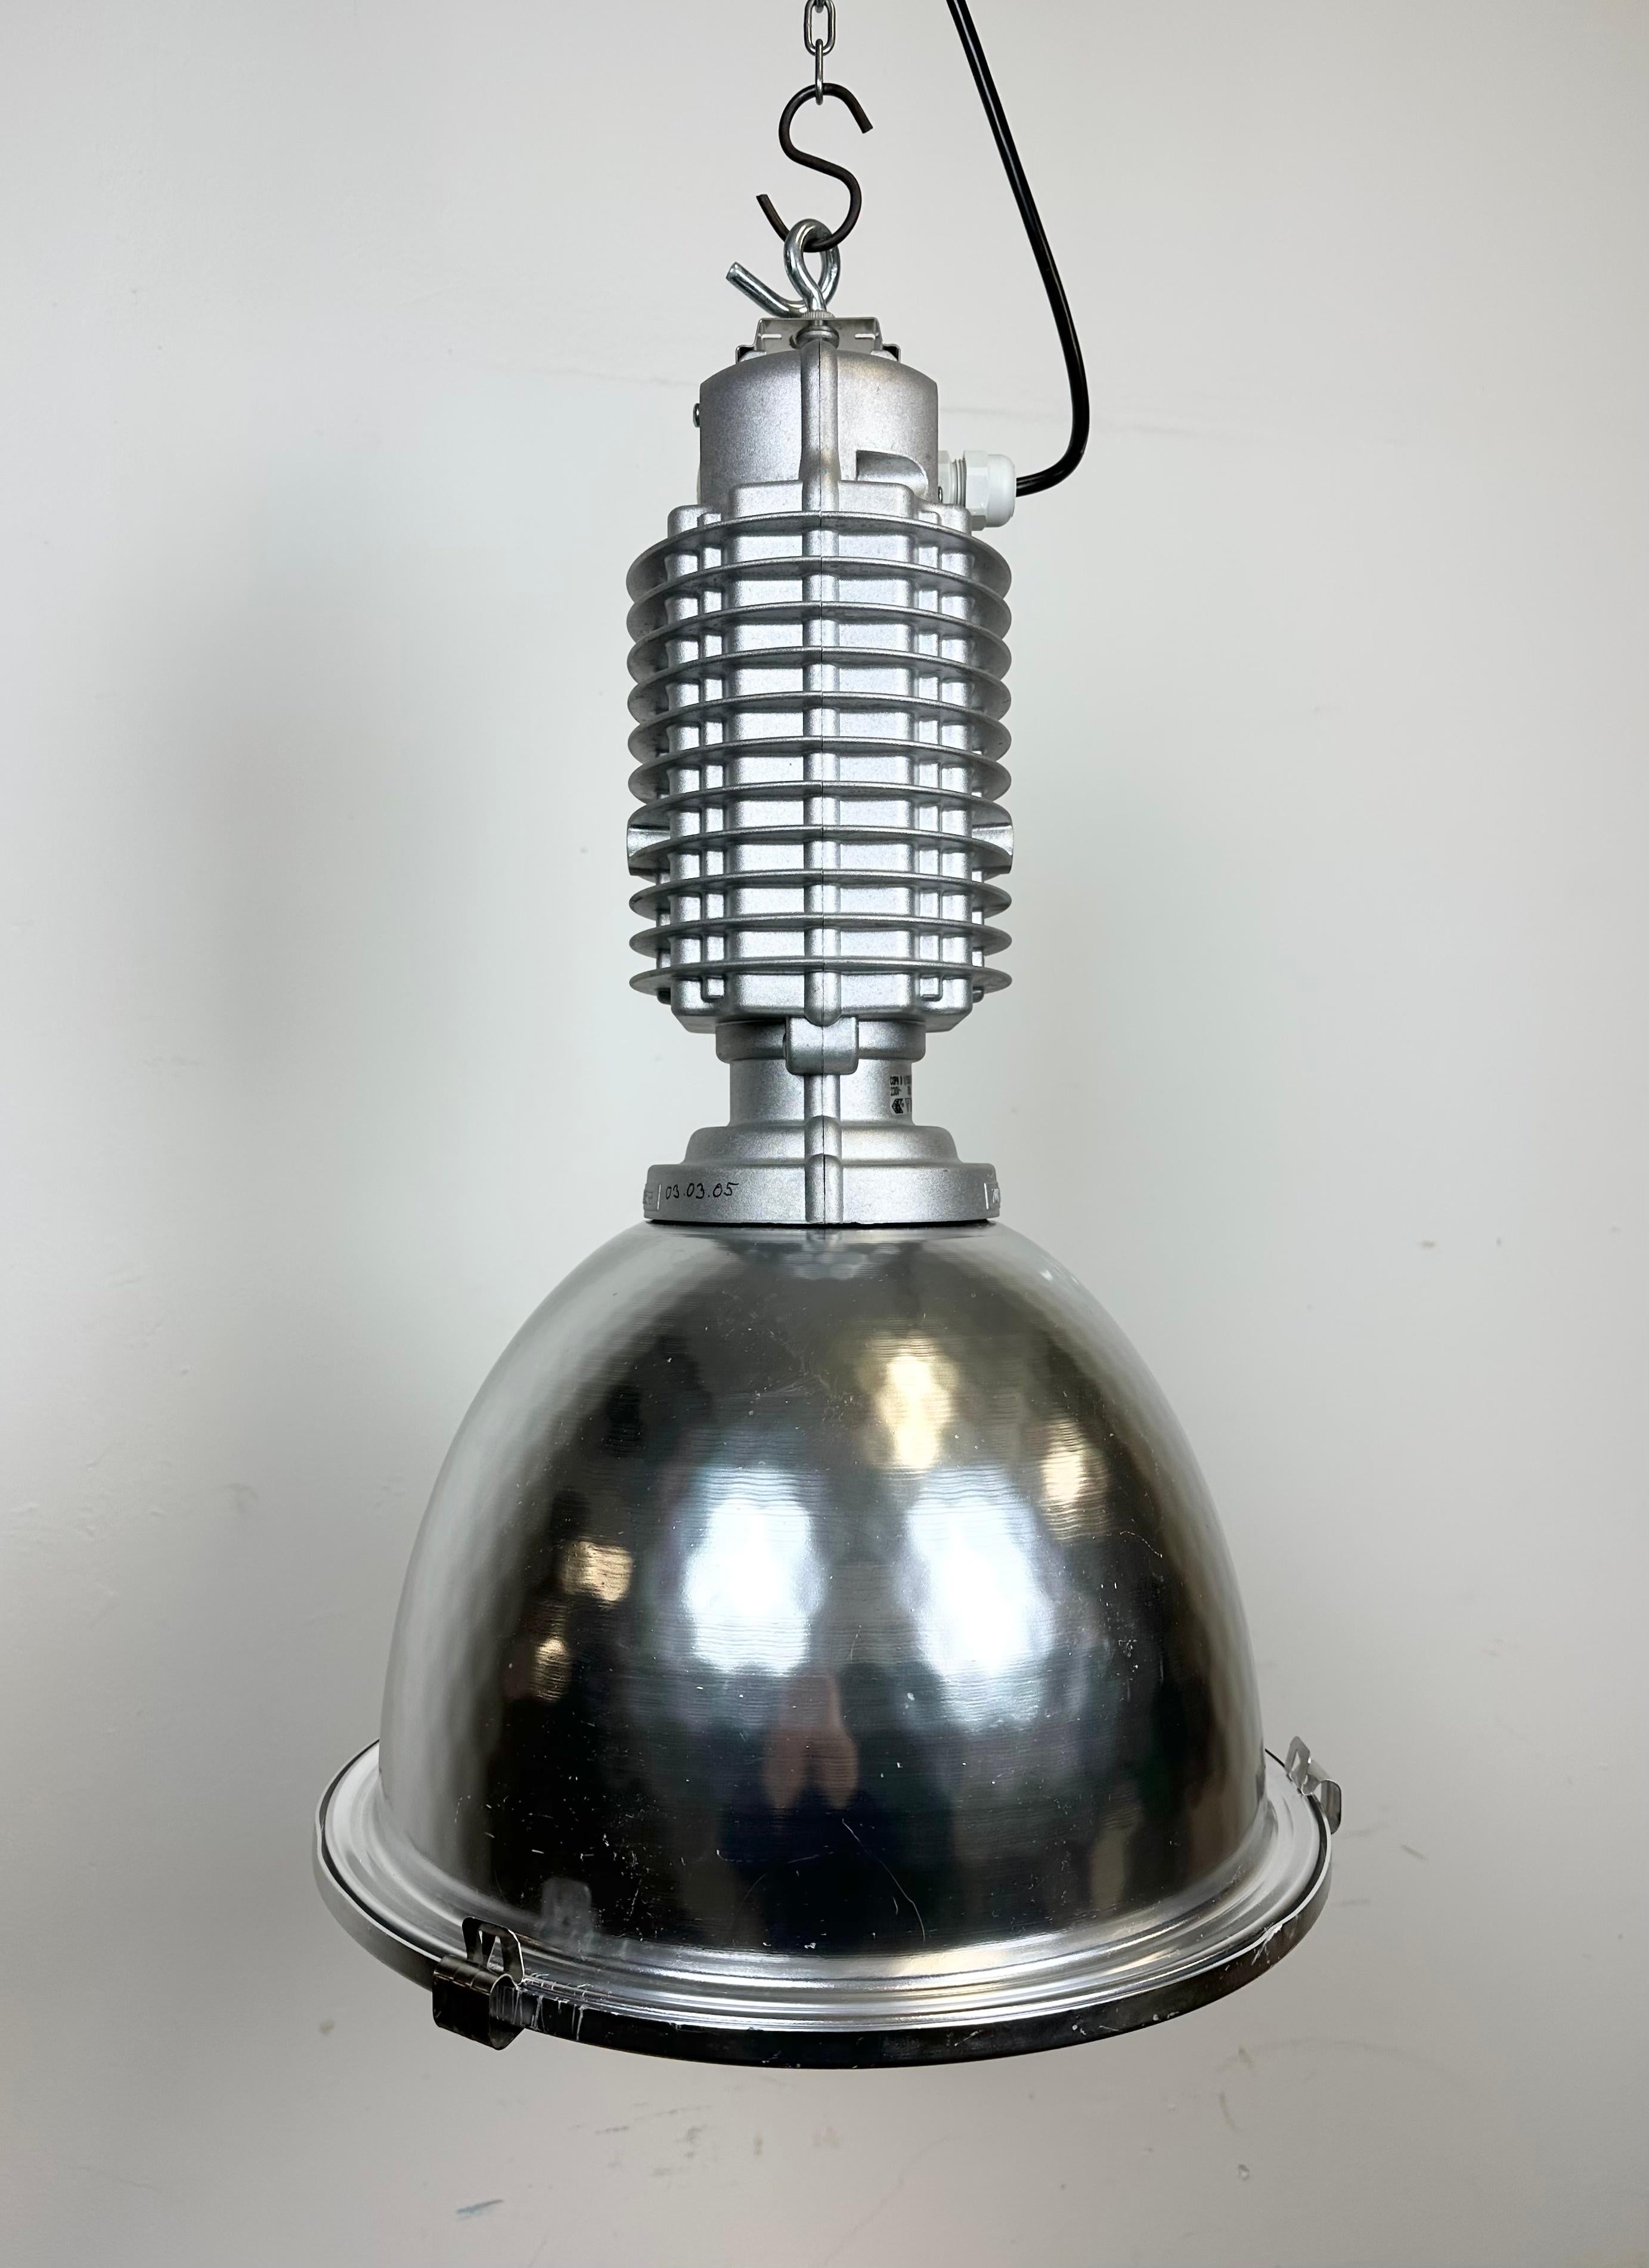 Austrian Industrial Pendant Lamp with Glass Cover by Charles Keller for Zumtobel, 1990s For Sale